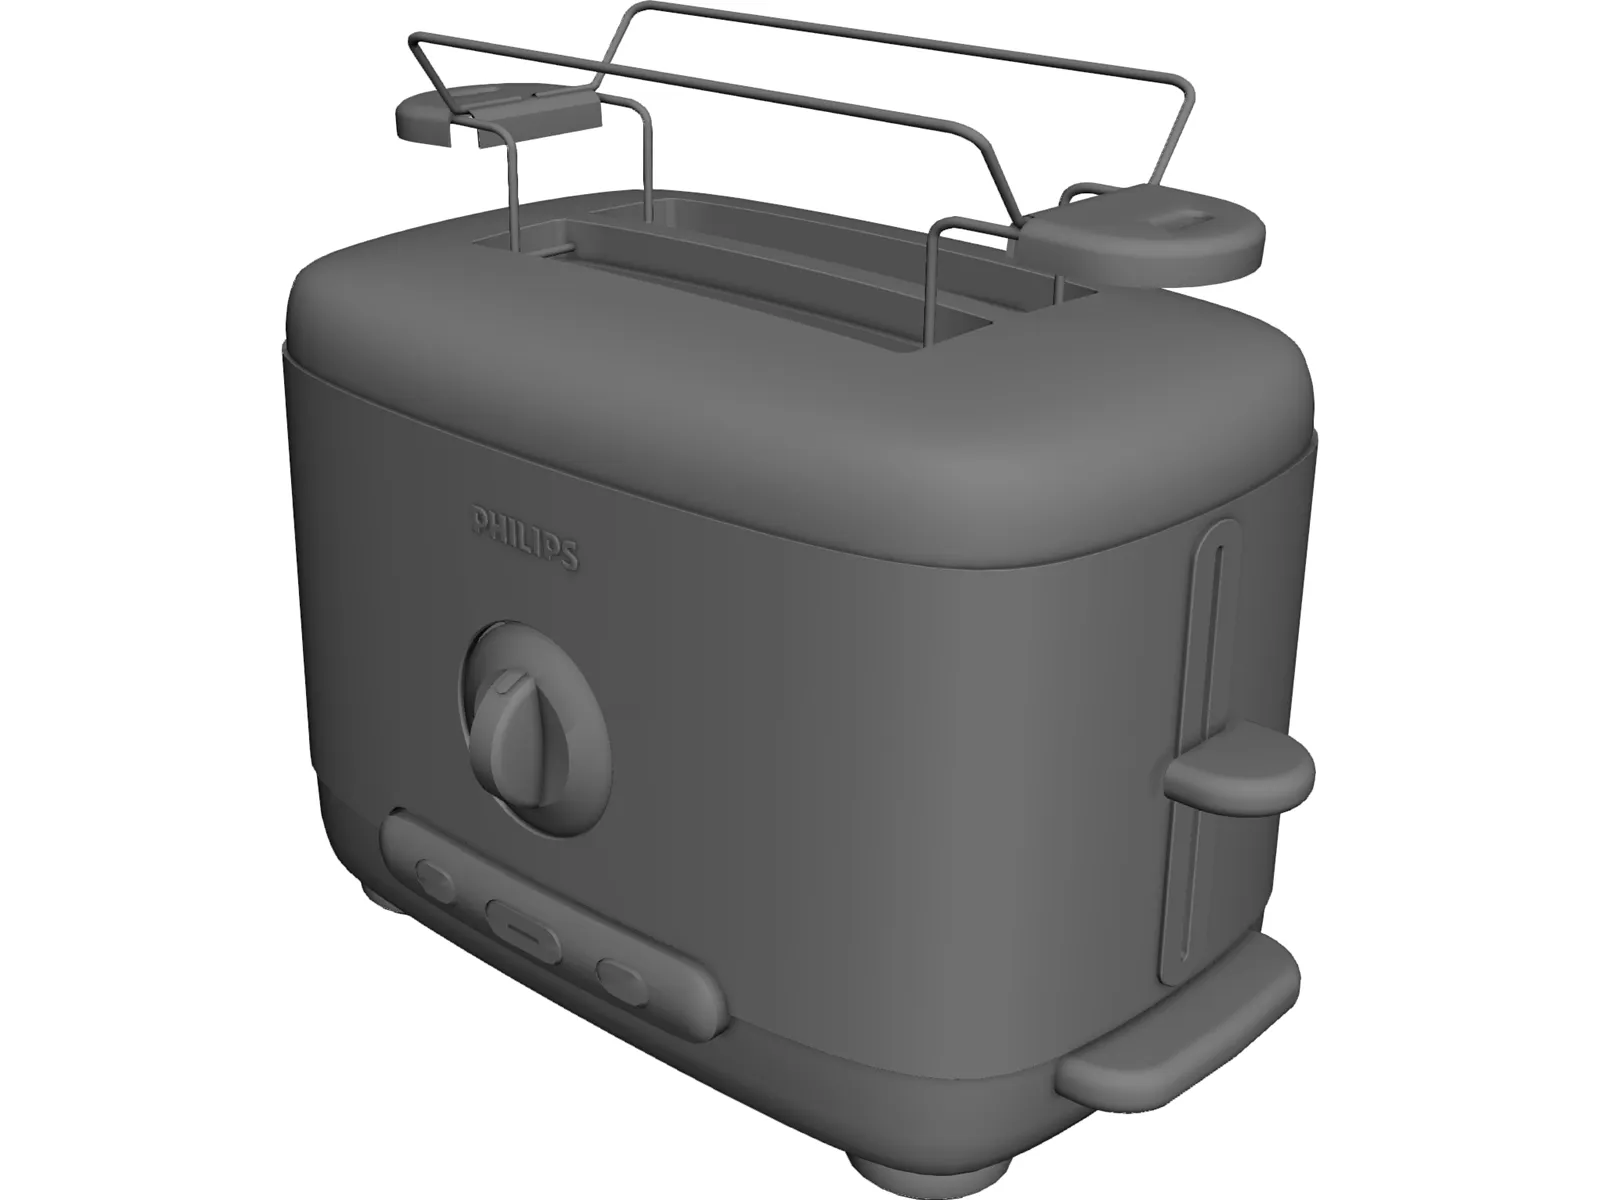 Philips Toaster 3D Model